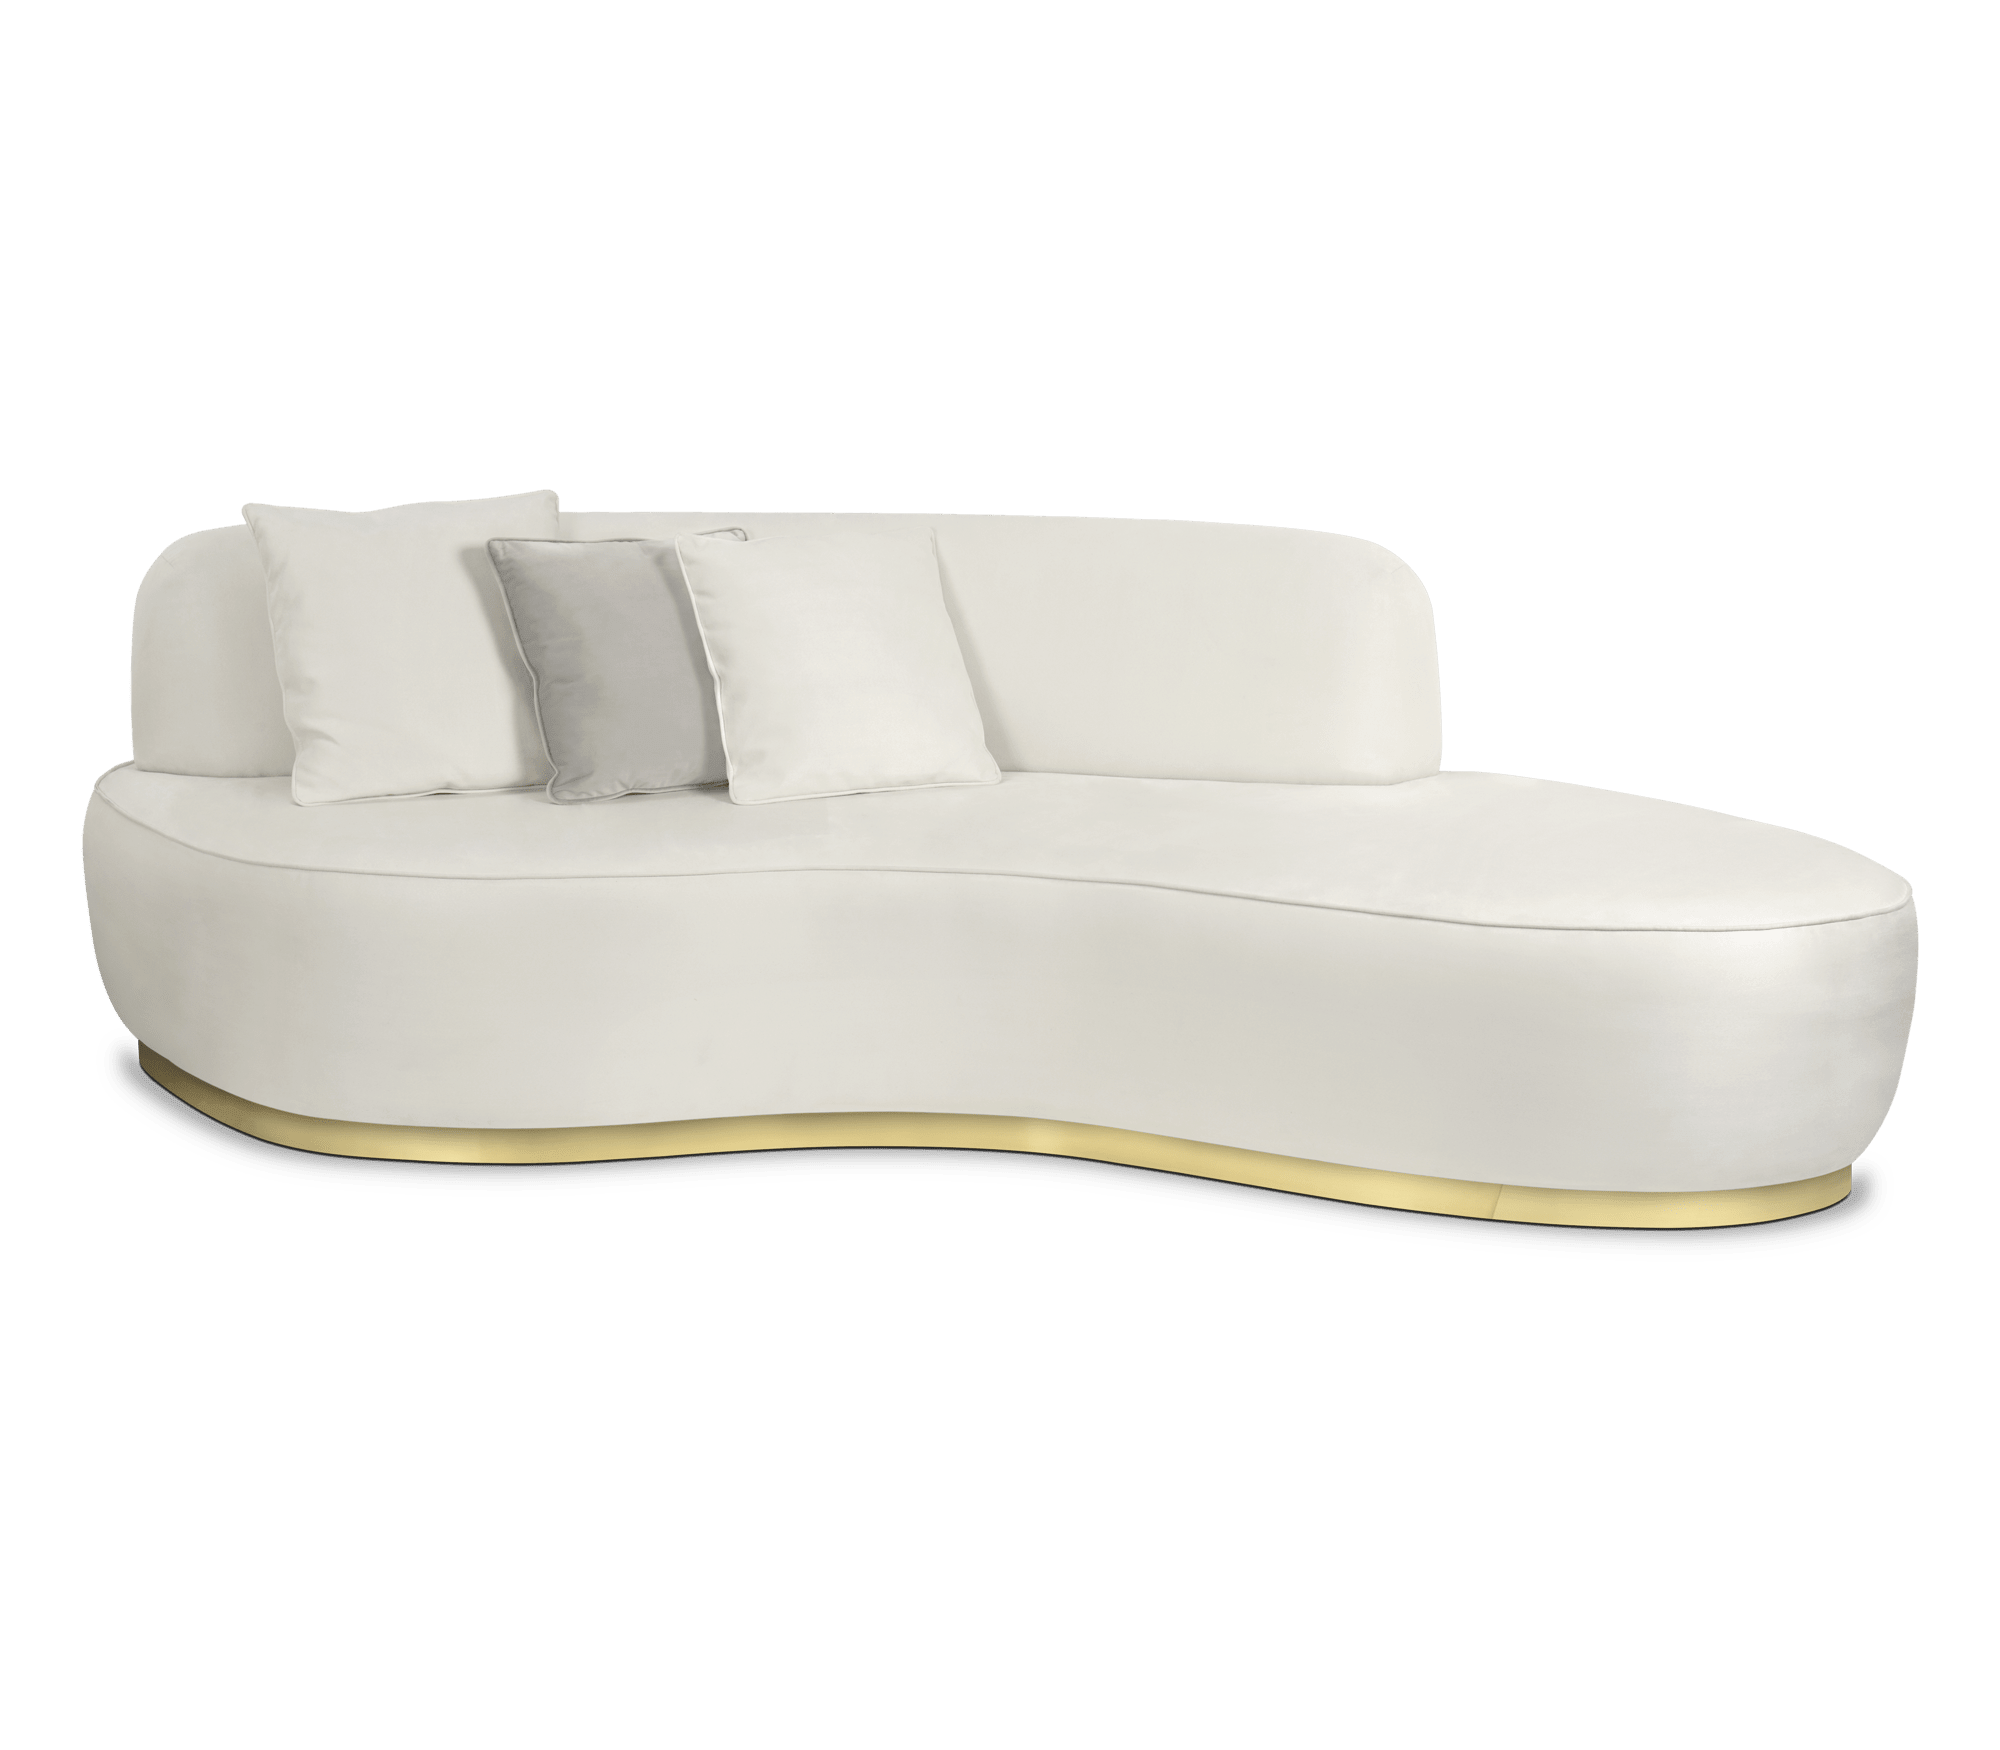 Top 25 Luxury Sofas for a Modern Living Room